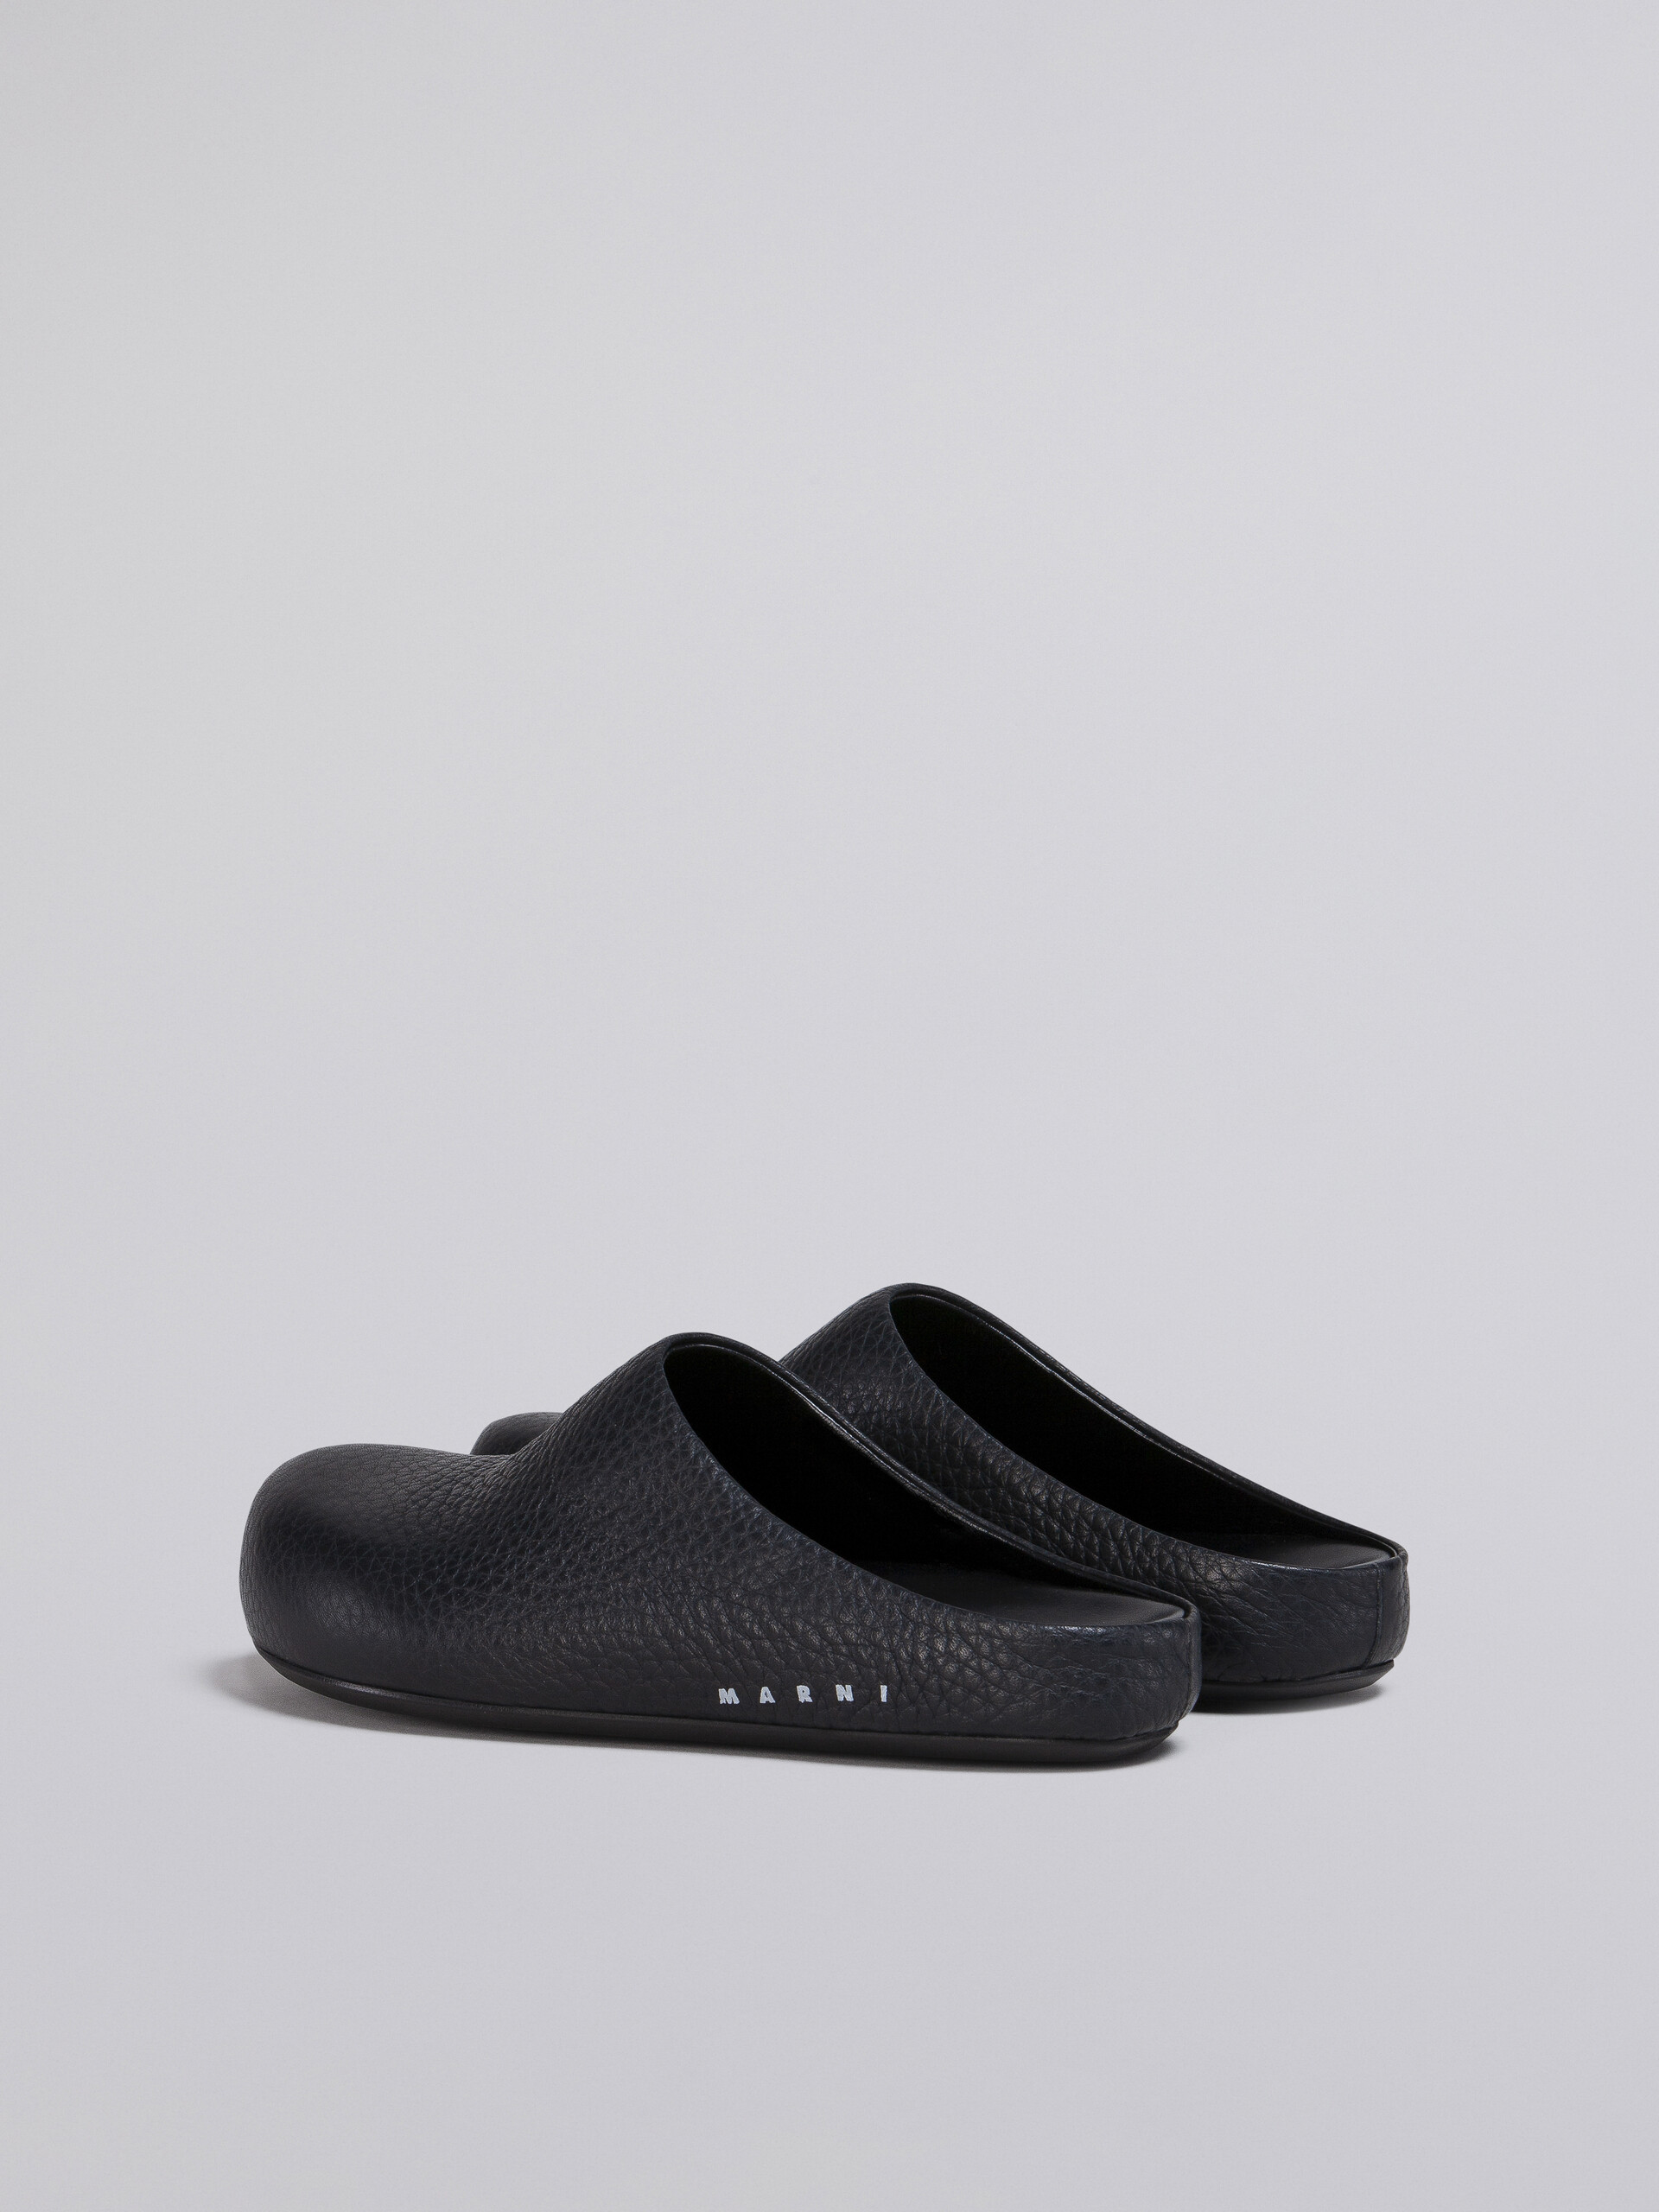 Unisex mule in grainy calf leather - Clogs - Image 3